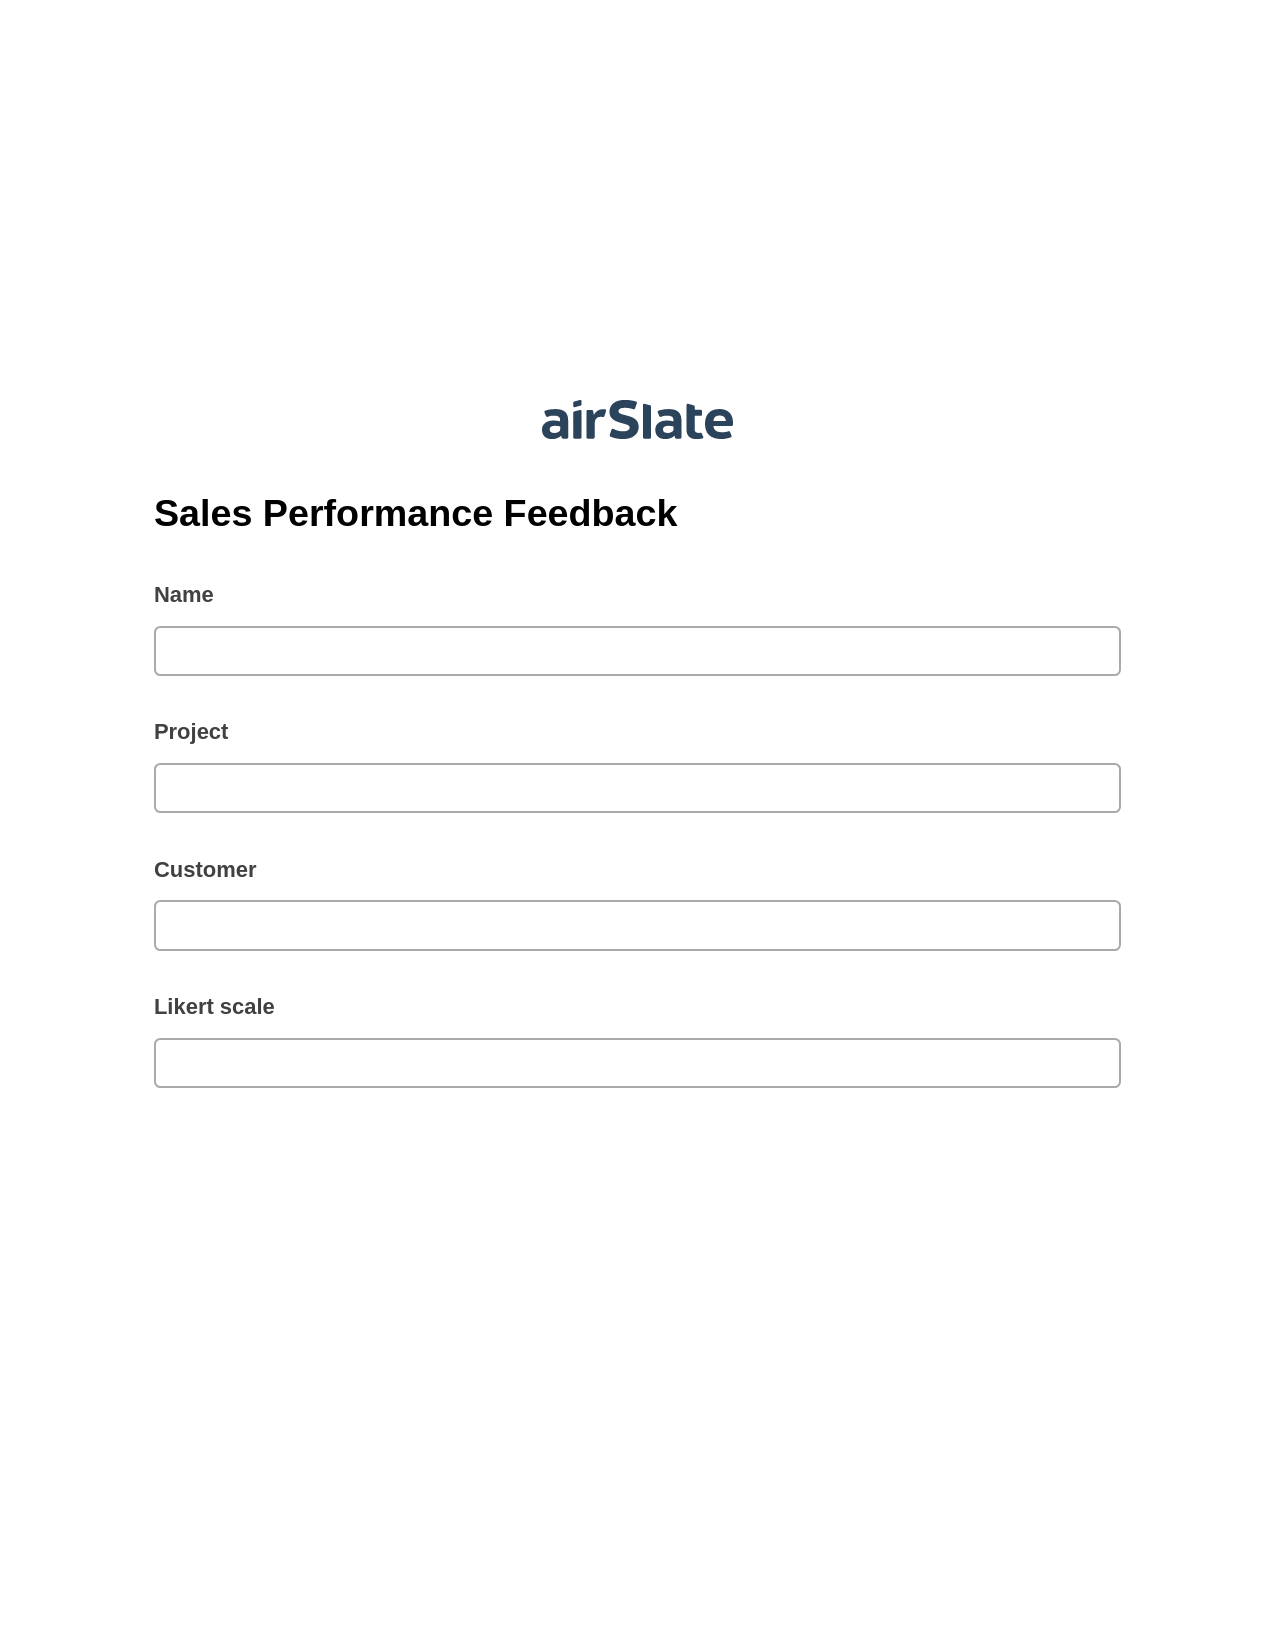 Sales Performance Feedback Pre-fill Document Bot, Remove Tags From Slate Bot, Post-finish Document Bot